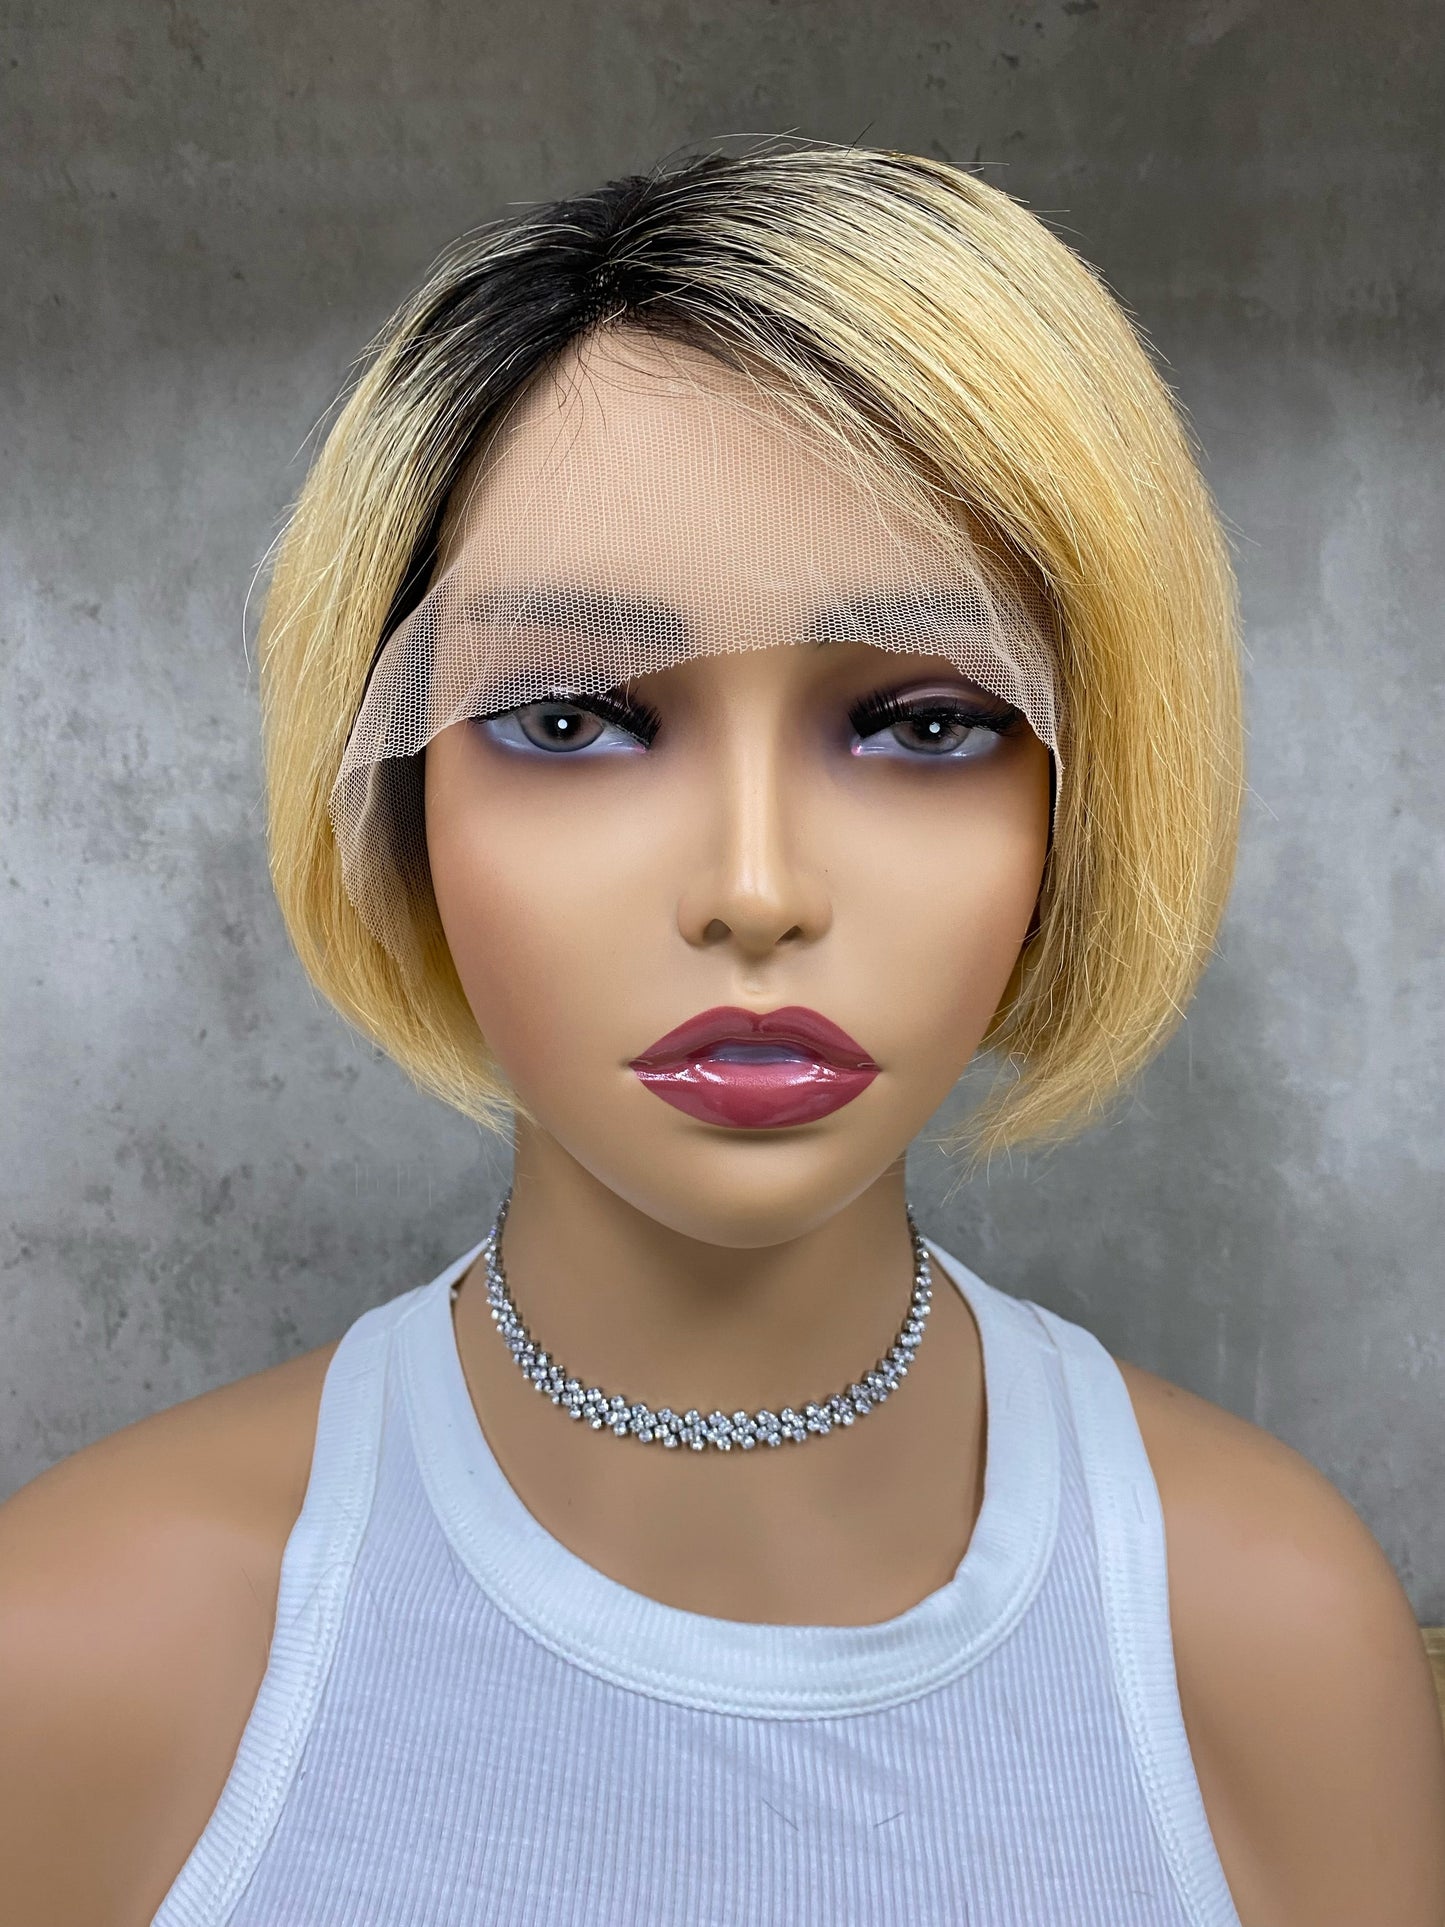 High Quality T-Part Frontal Remy Human Hair Pixie Cut Wigs